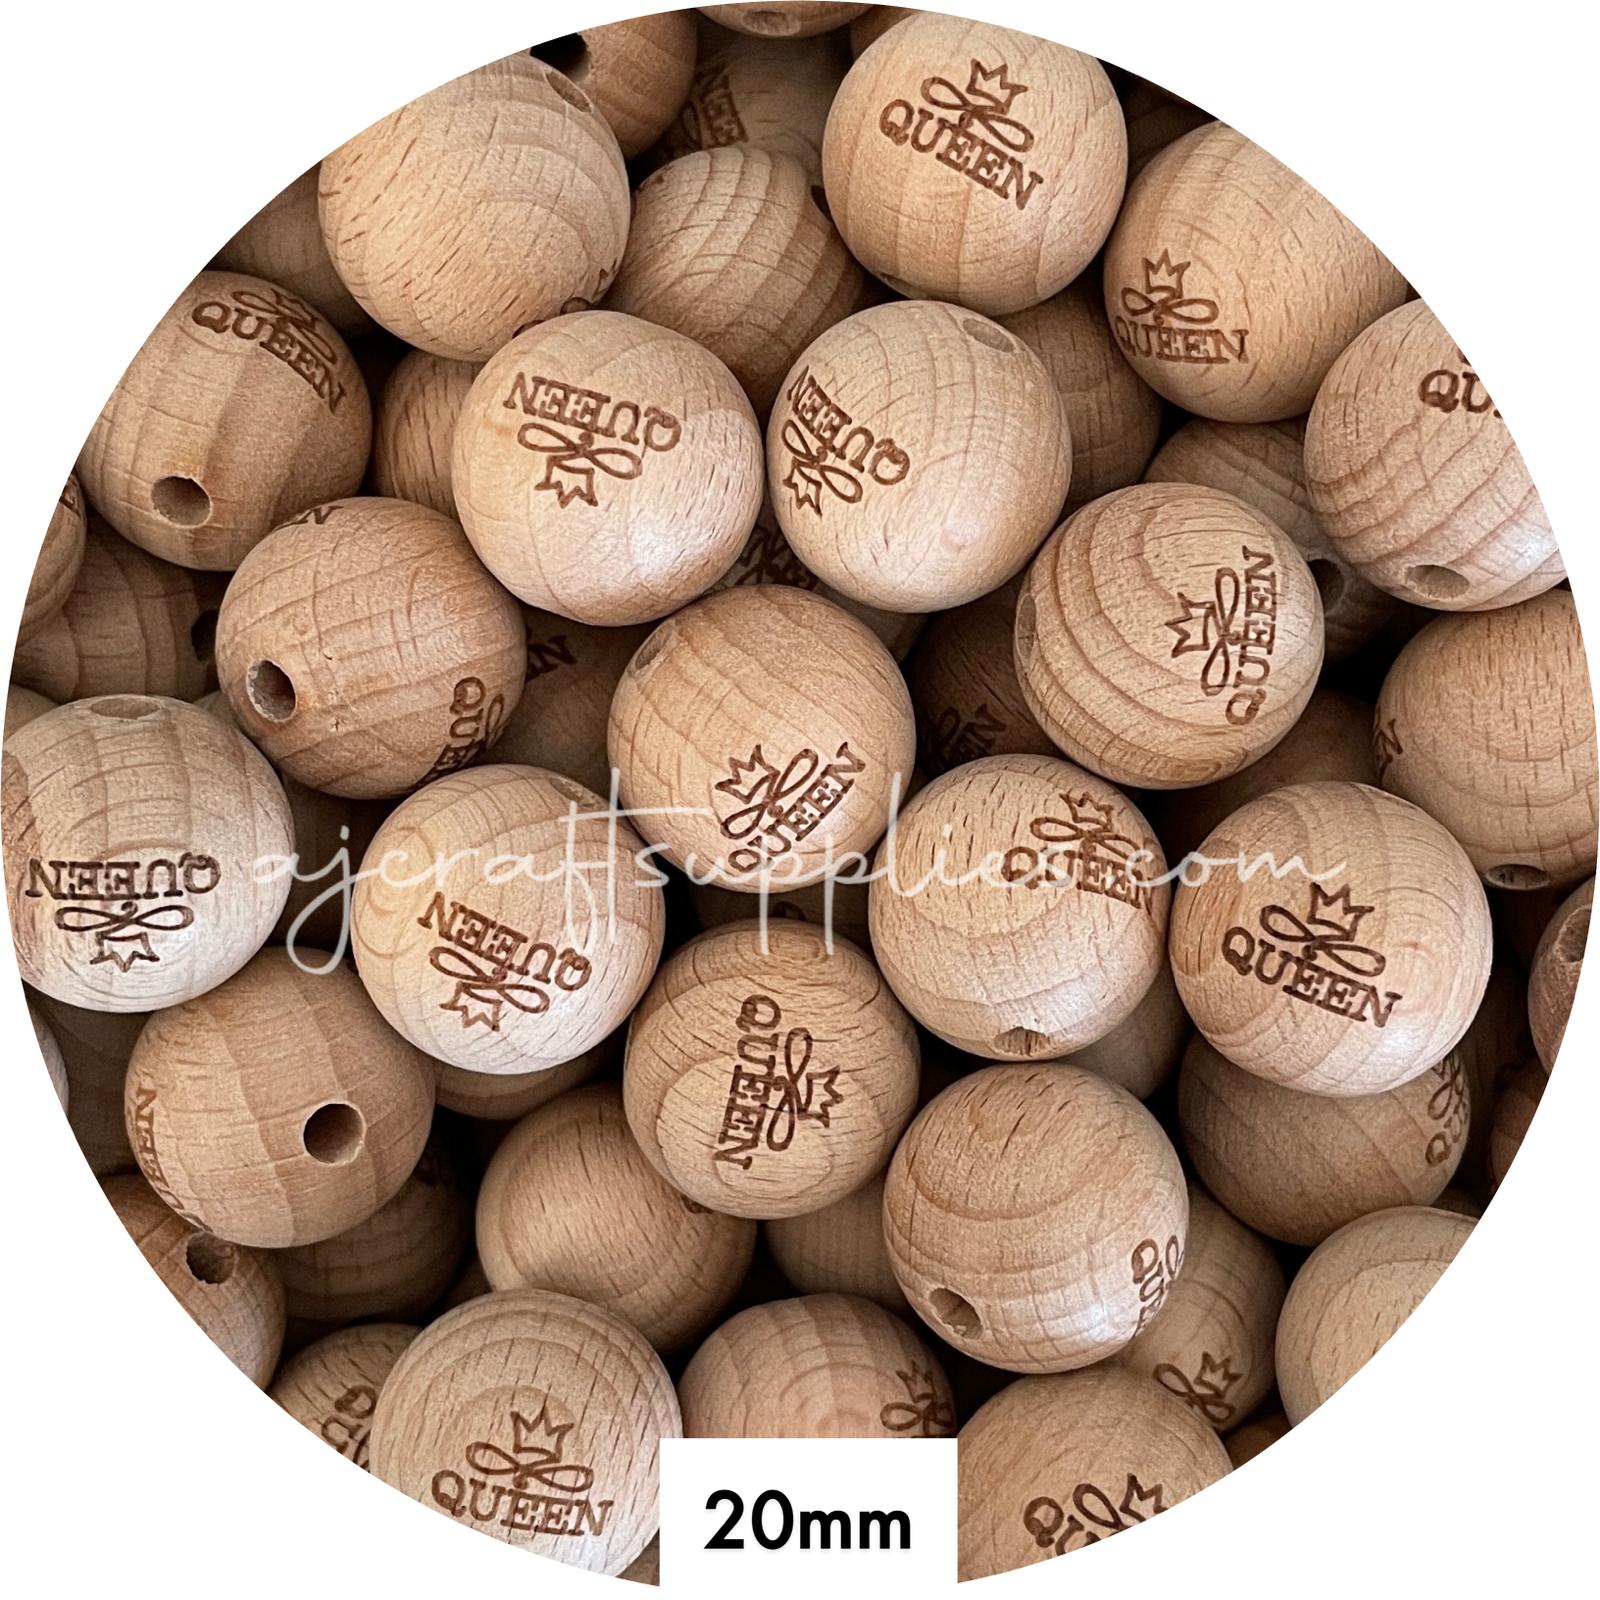 Beech Wood Engraved Beads (Queen) - 20mm Round - 5 beads (Limited Edition)